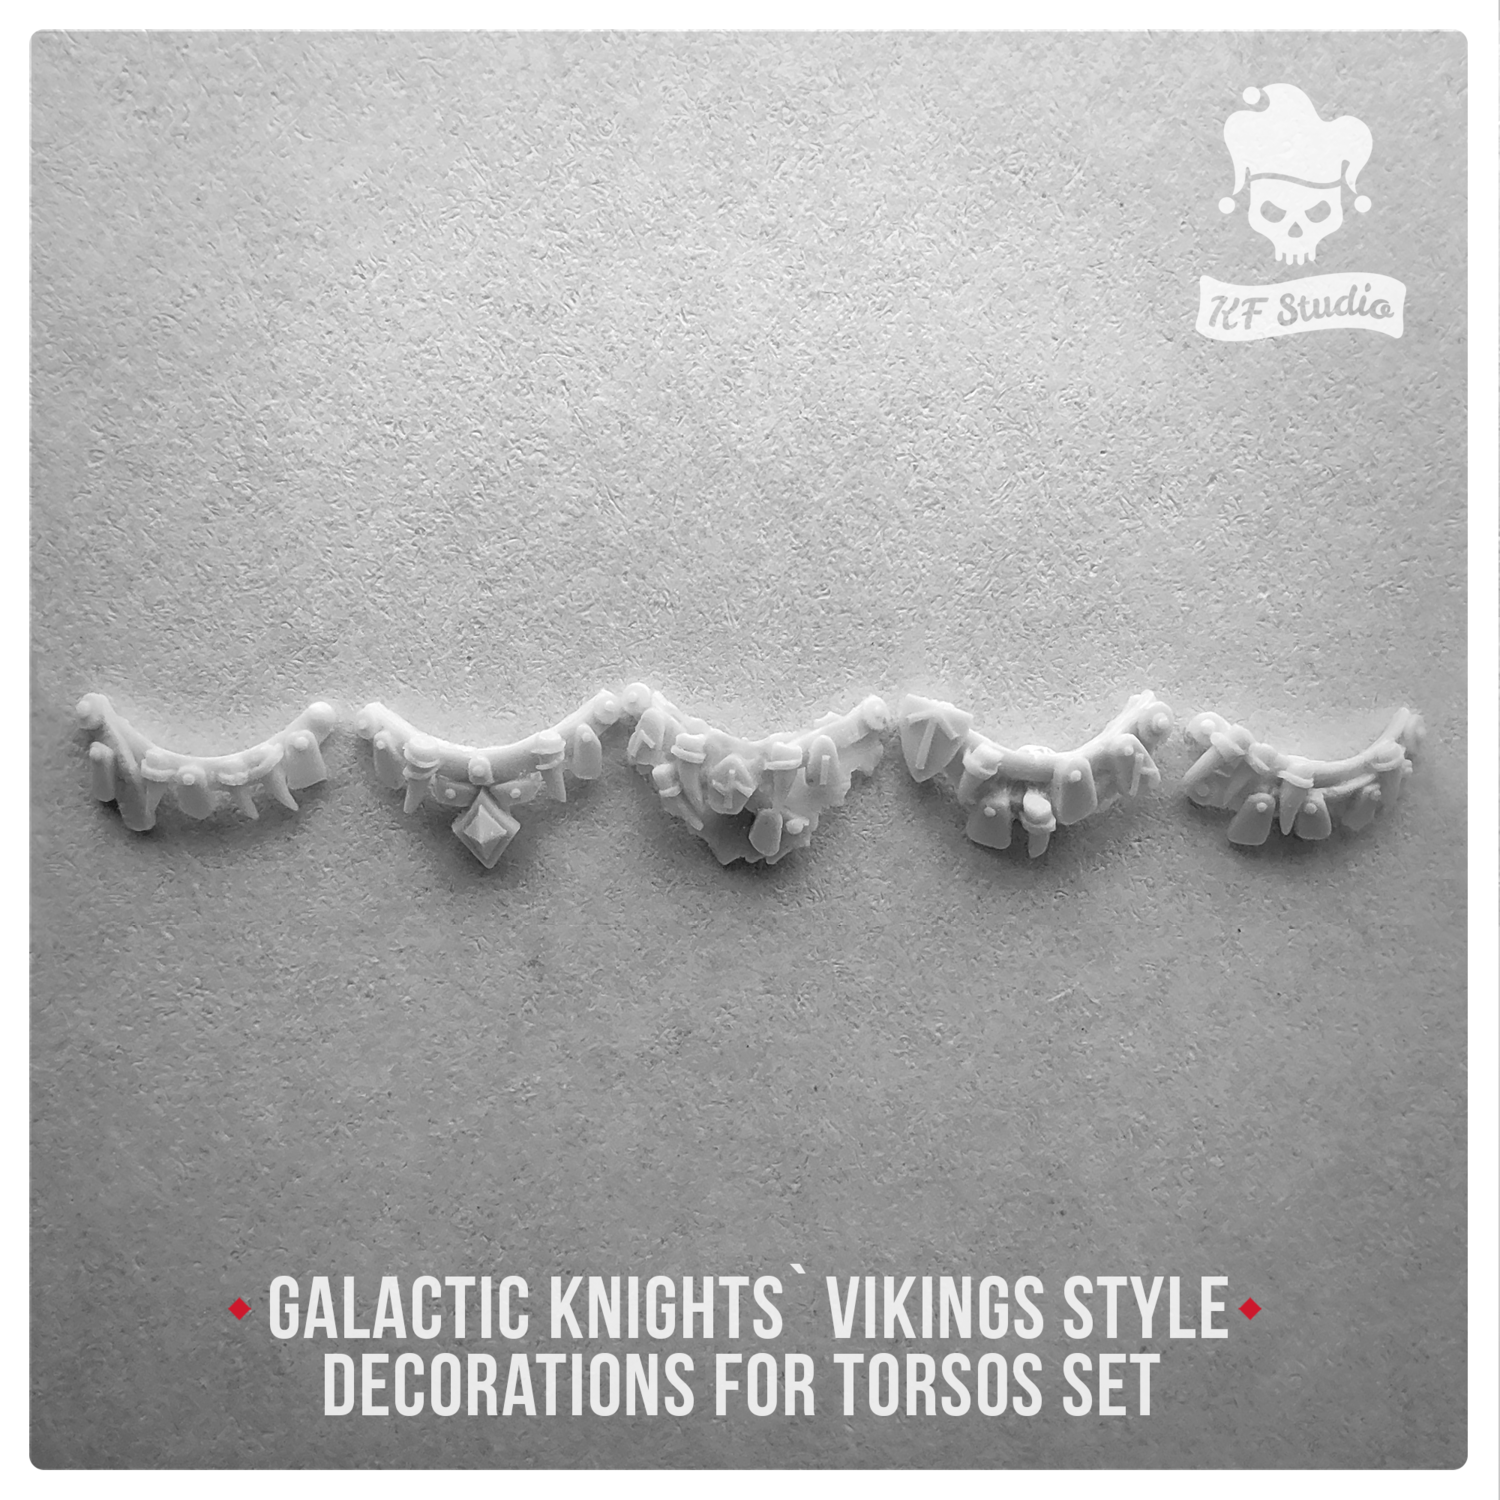 Galactic Knights Viking Style Decorations for torsos by KFStudio